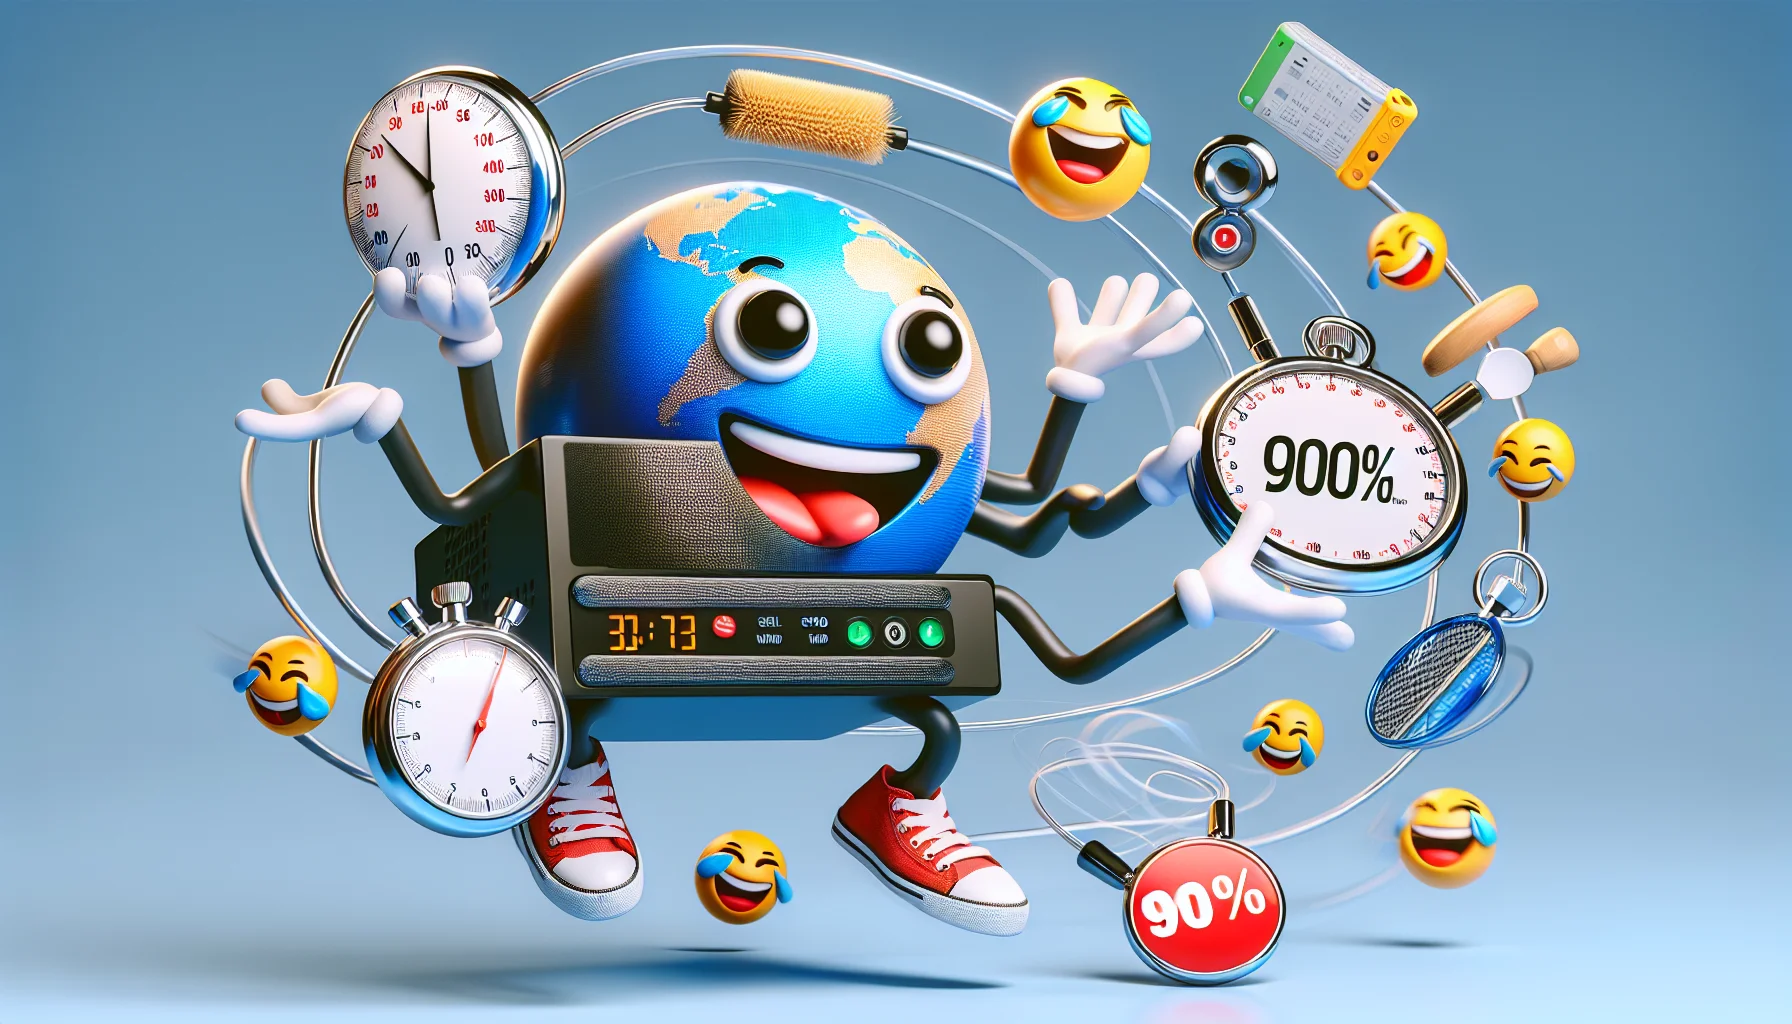 Create a realistic, comical scene illustrating the abstract concept of web hosting. Visualize a caricature of a control panel energetically performing tasks. It's juggling a variety of items—a globe signifying the web, a stopwatch for speed, a lock for security, and a 99% badge for uptime. Also, create some laughing emojis floating around to add a hilarious touch. To highlight the ease of use, the control panel is doing all these effortlessly, with a smug smile. Please remember, this image should not be a direct reference to any specific web hosting service or brand.